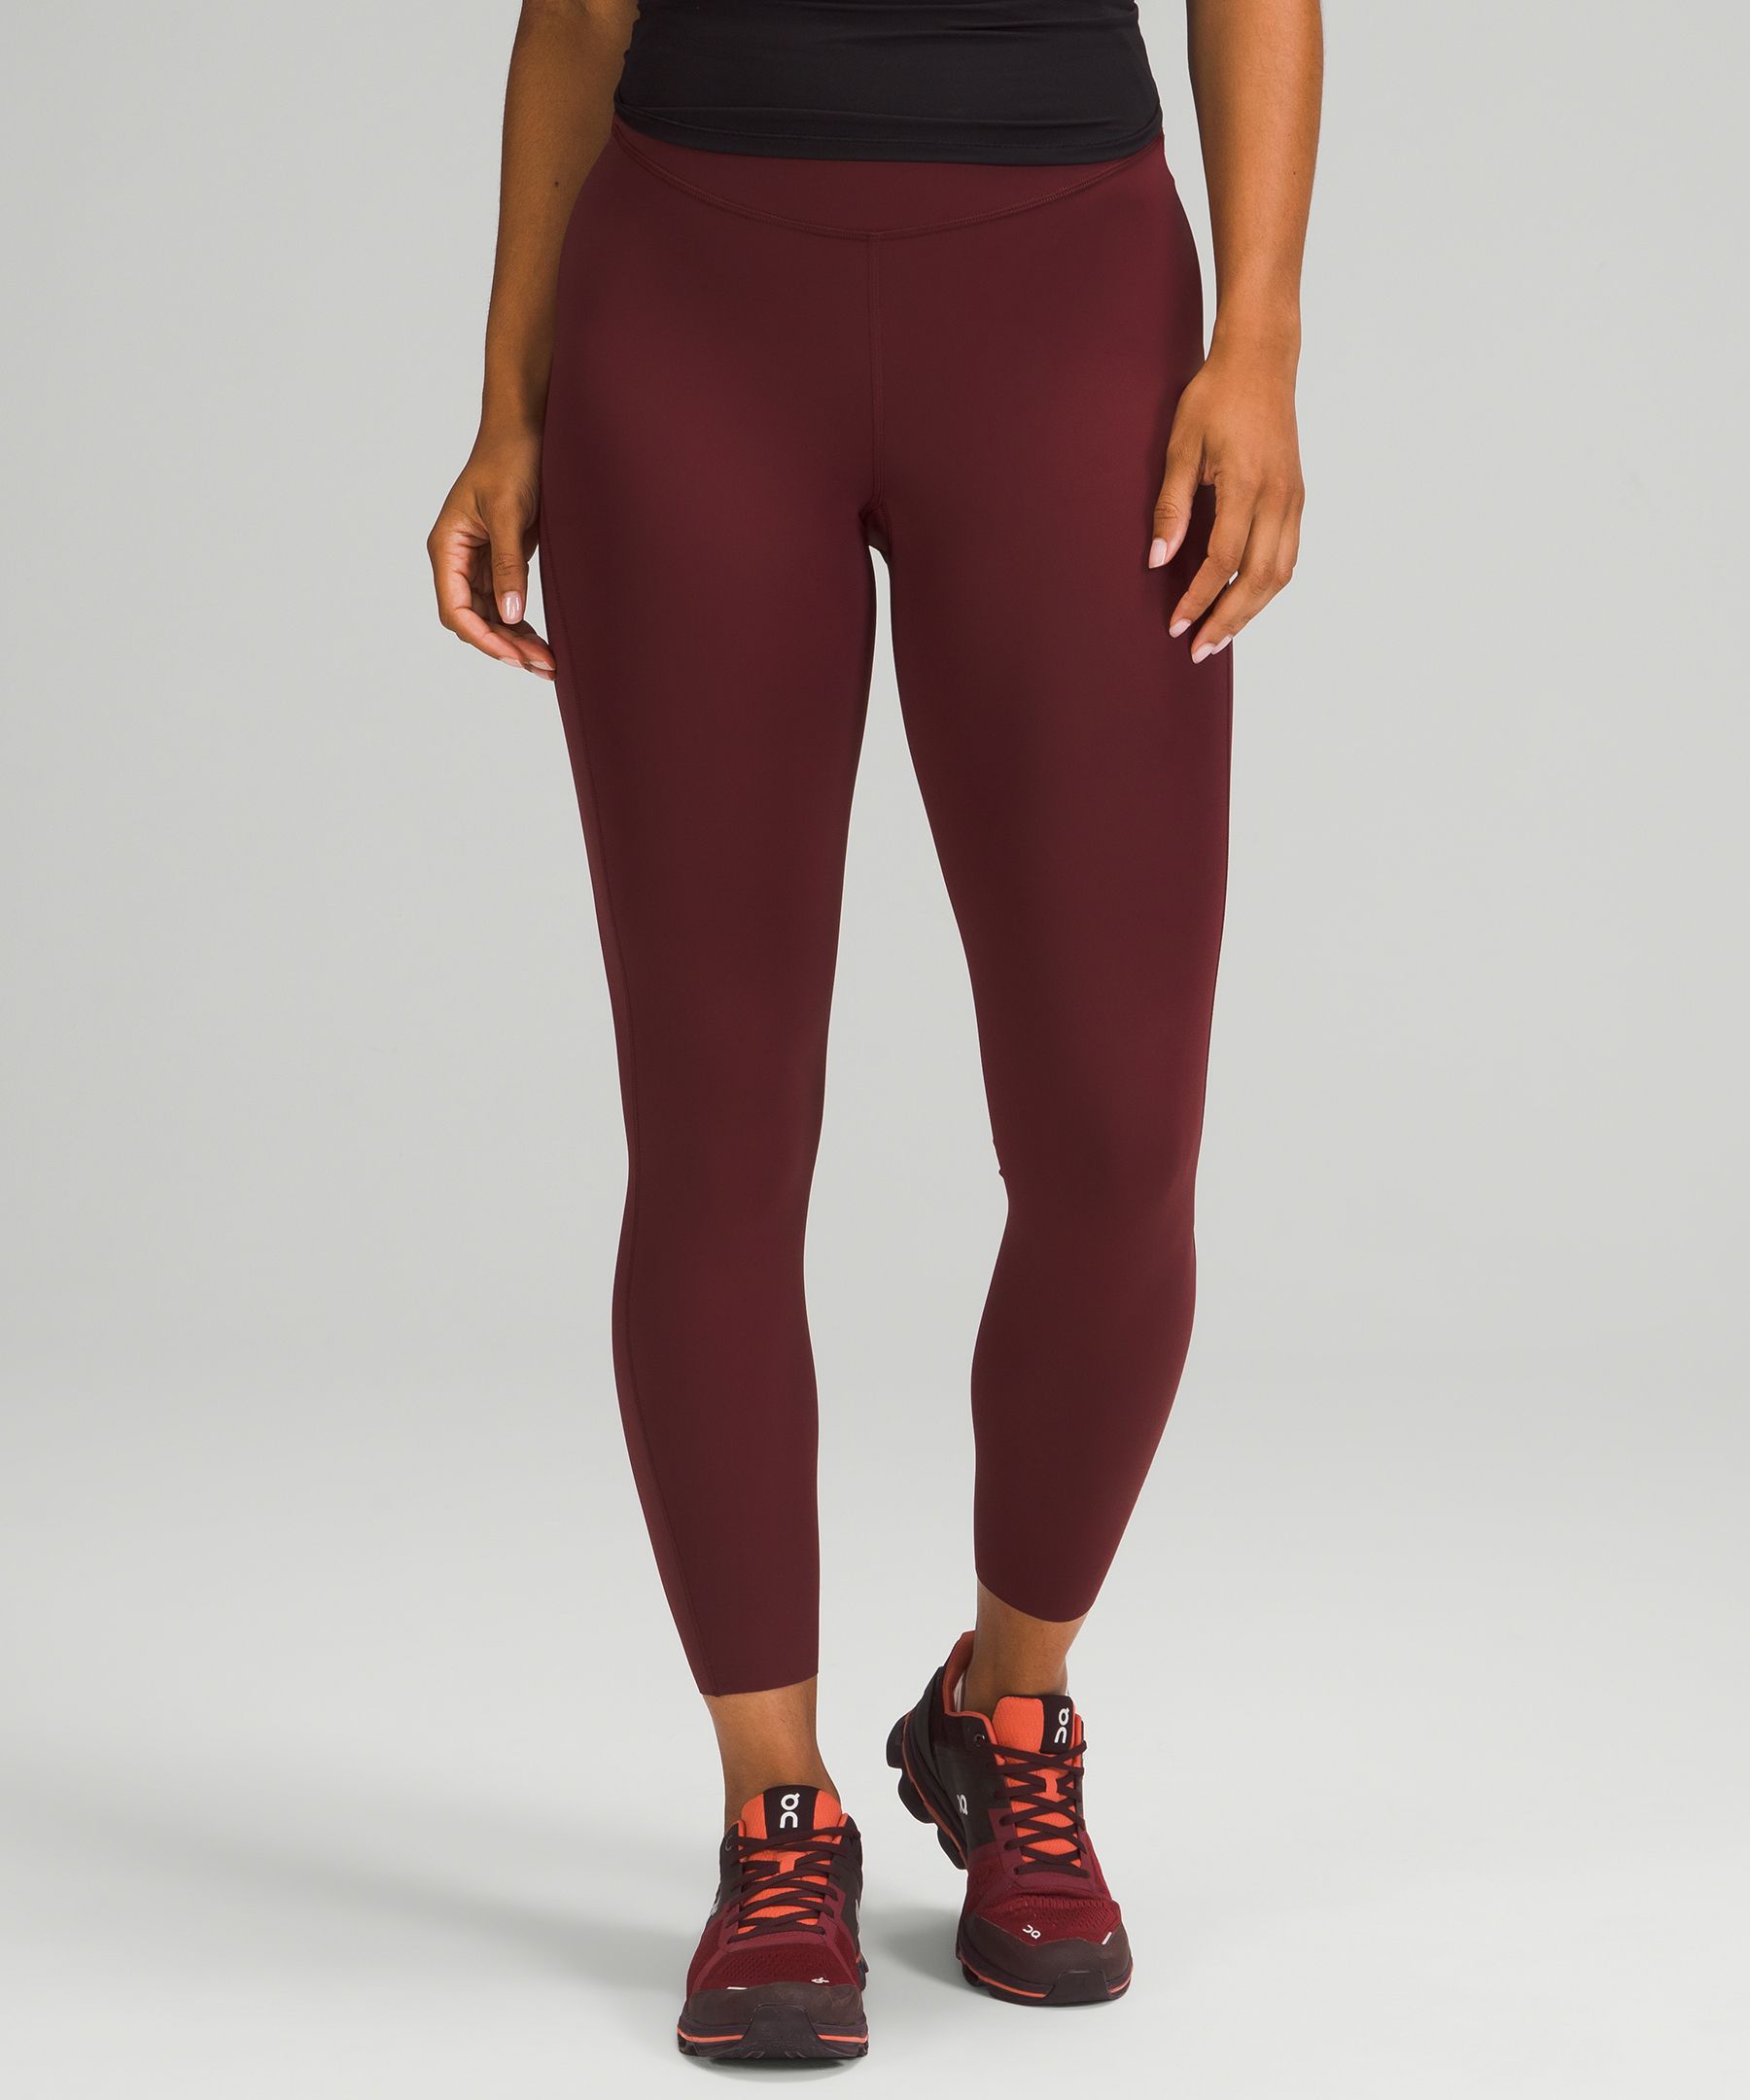 Lululemon Base Pace High-rise Running Tights 25" In Red Merlot